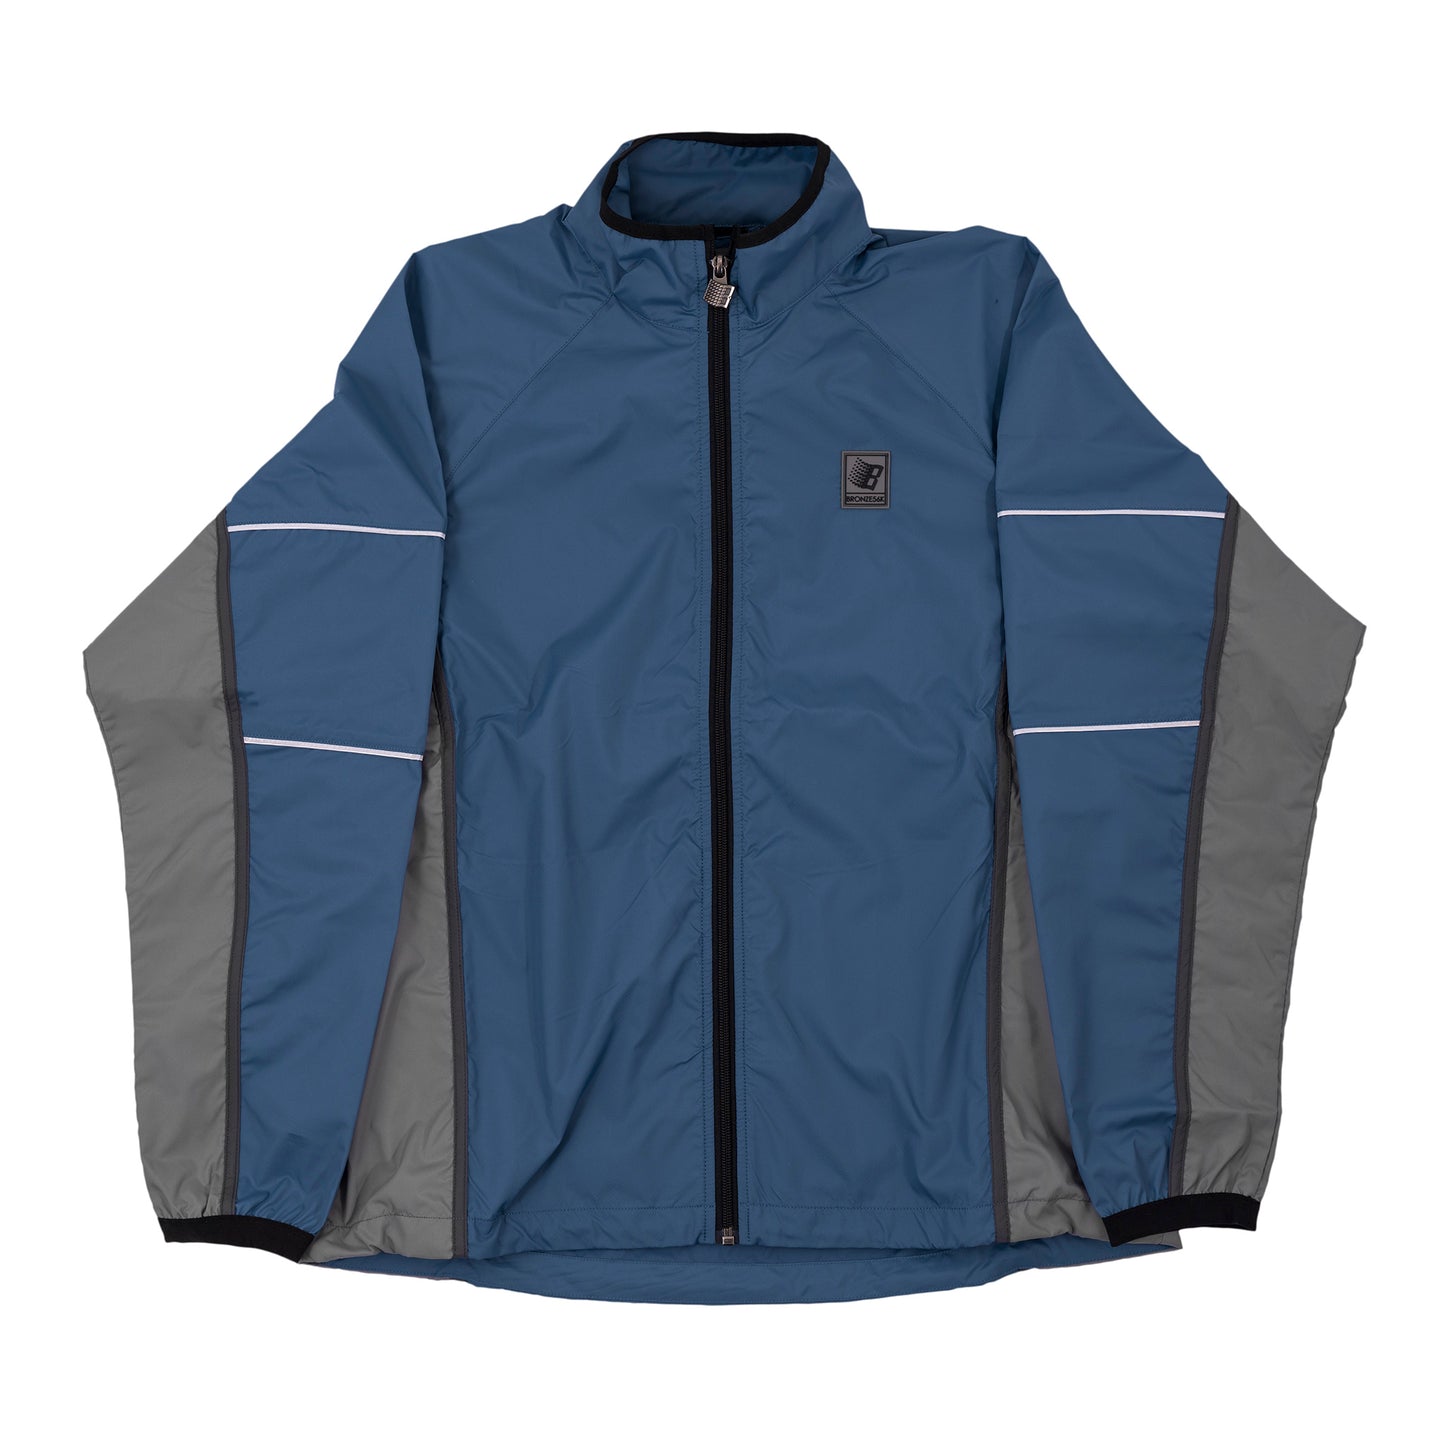 HIGH PERFORMACE WINDBREAKER AIR FORCE BLUE